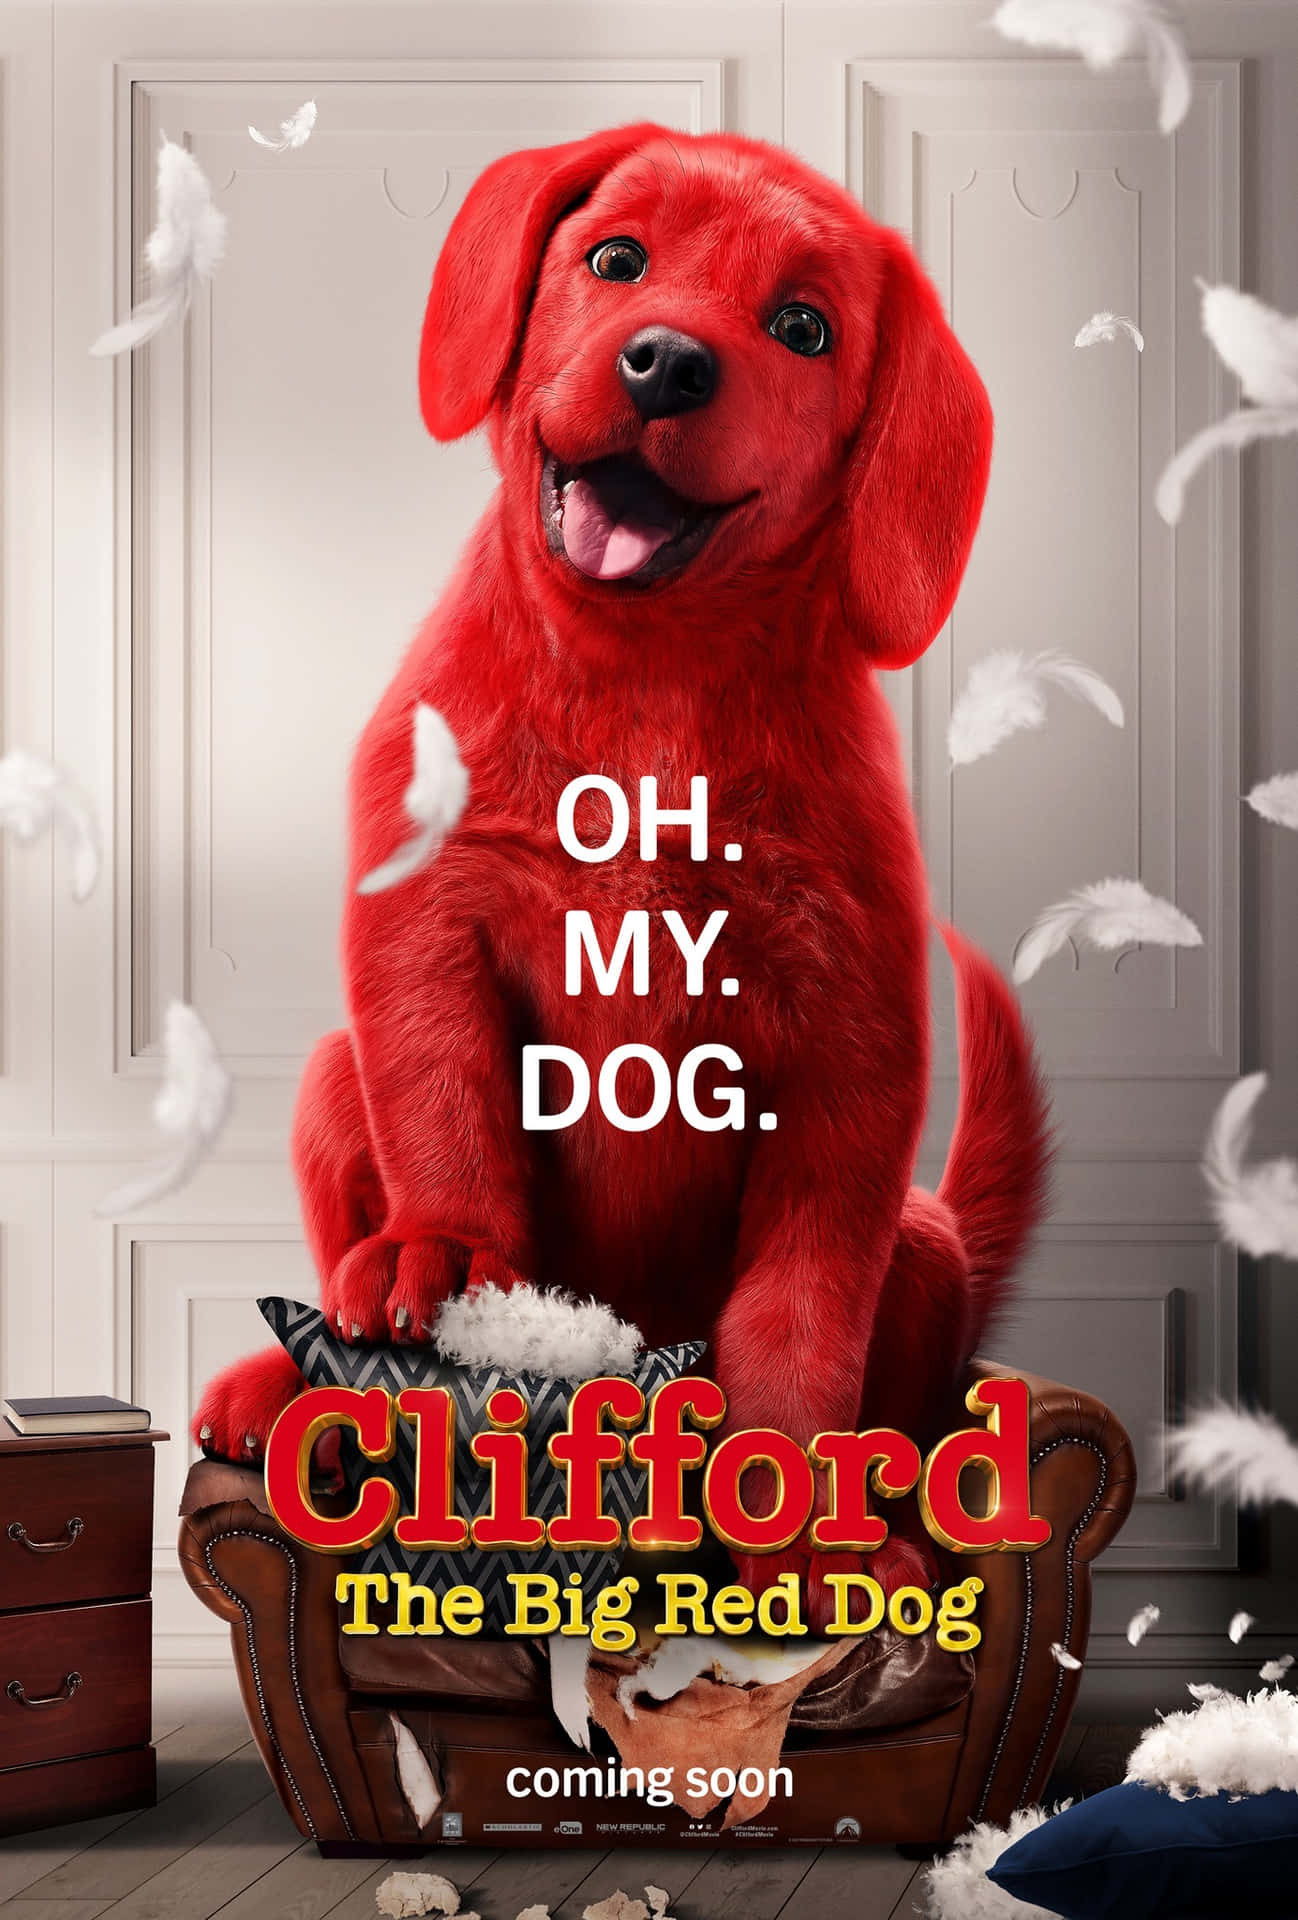 Clifford The Big Red Dog is here to show you a good time!